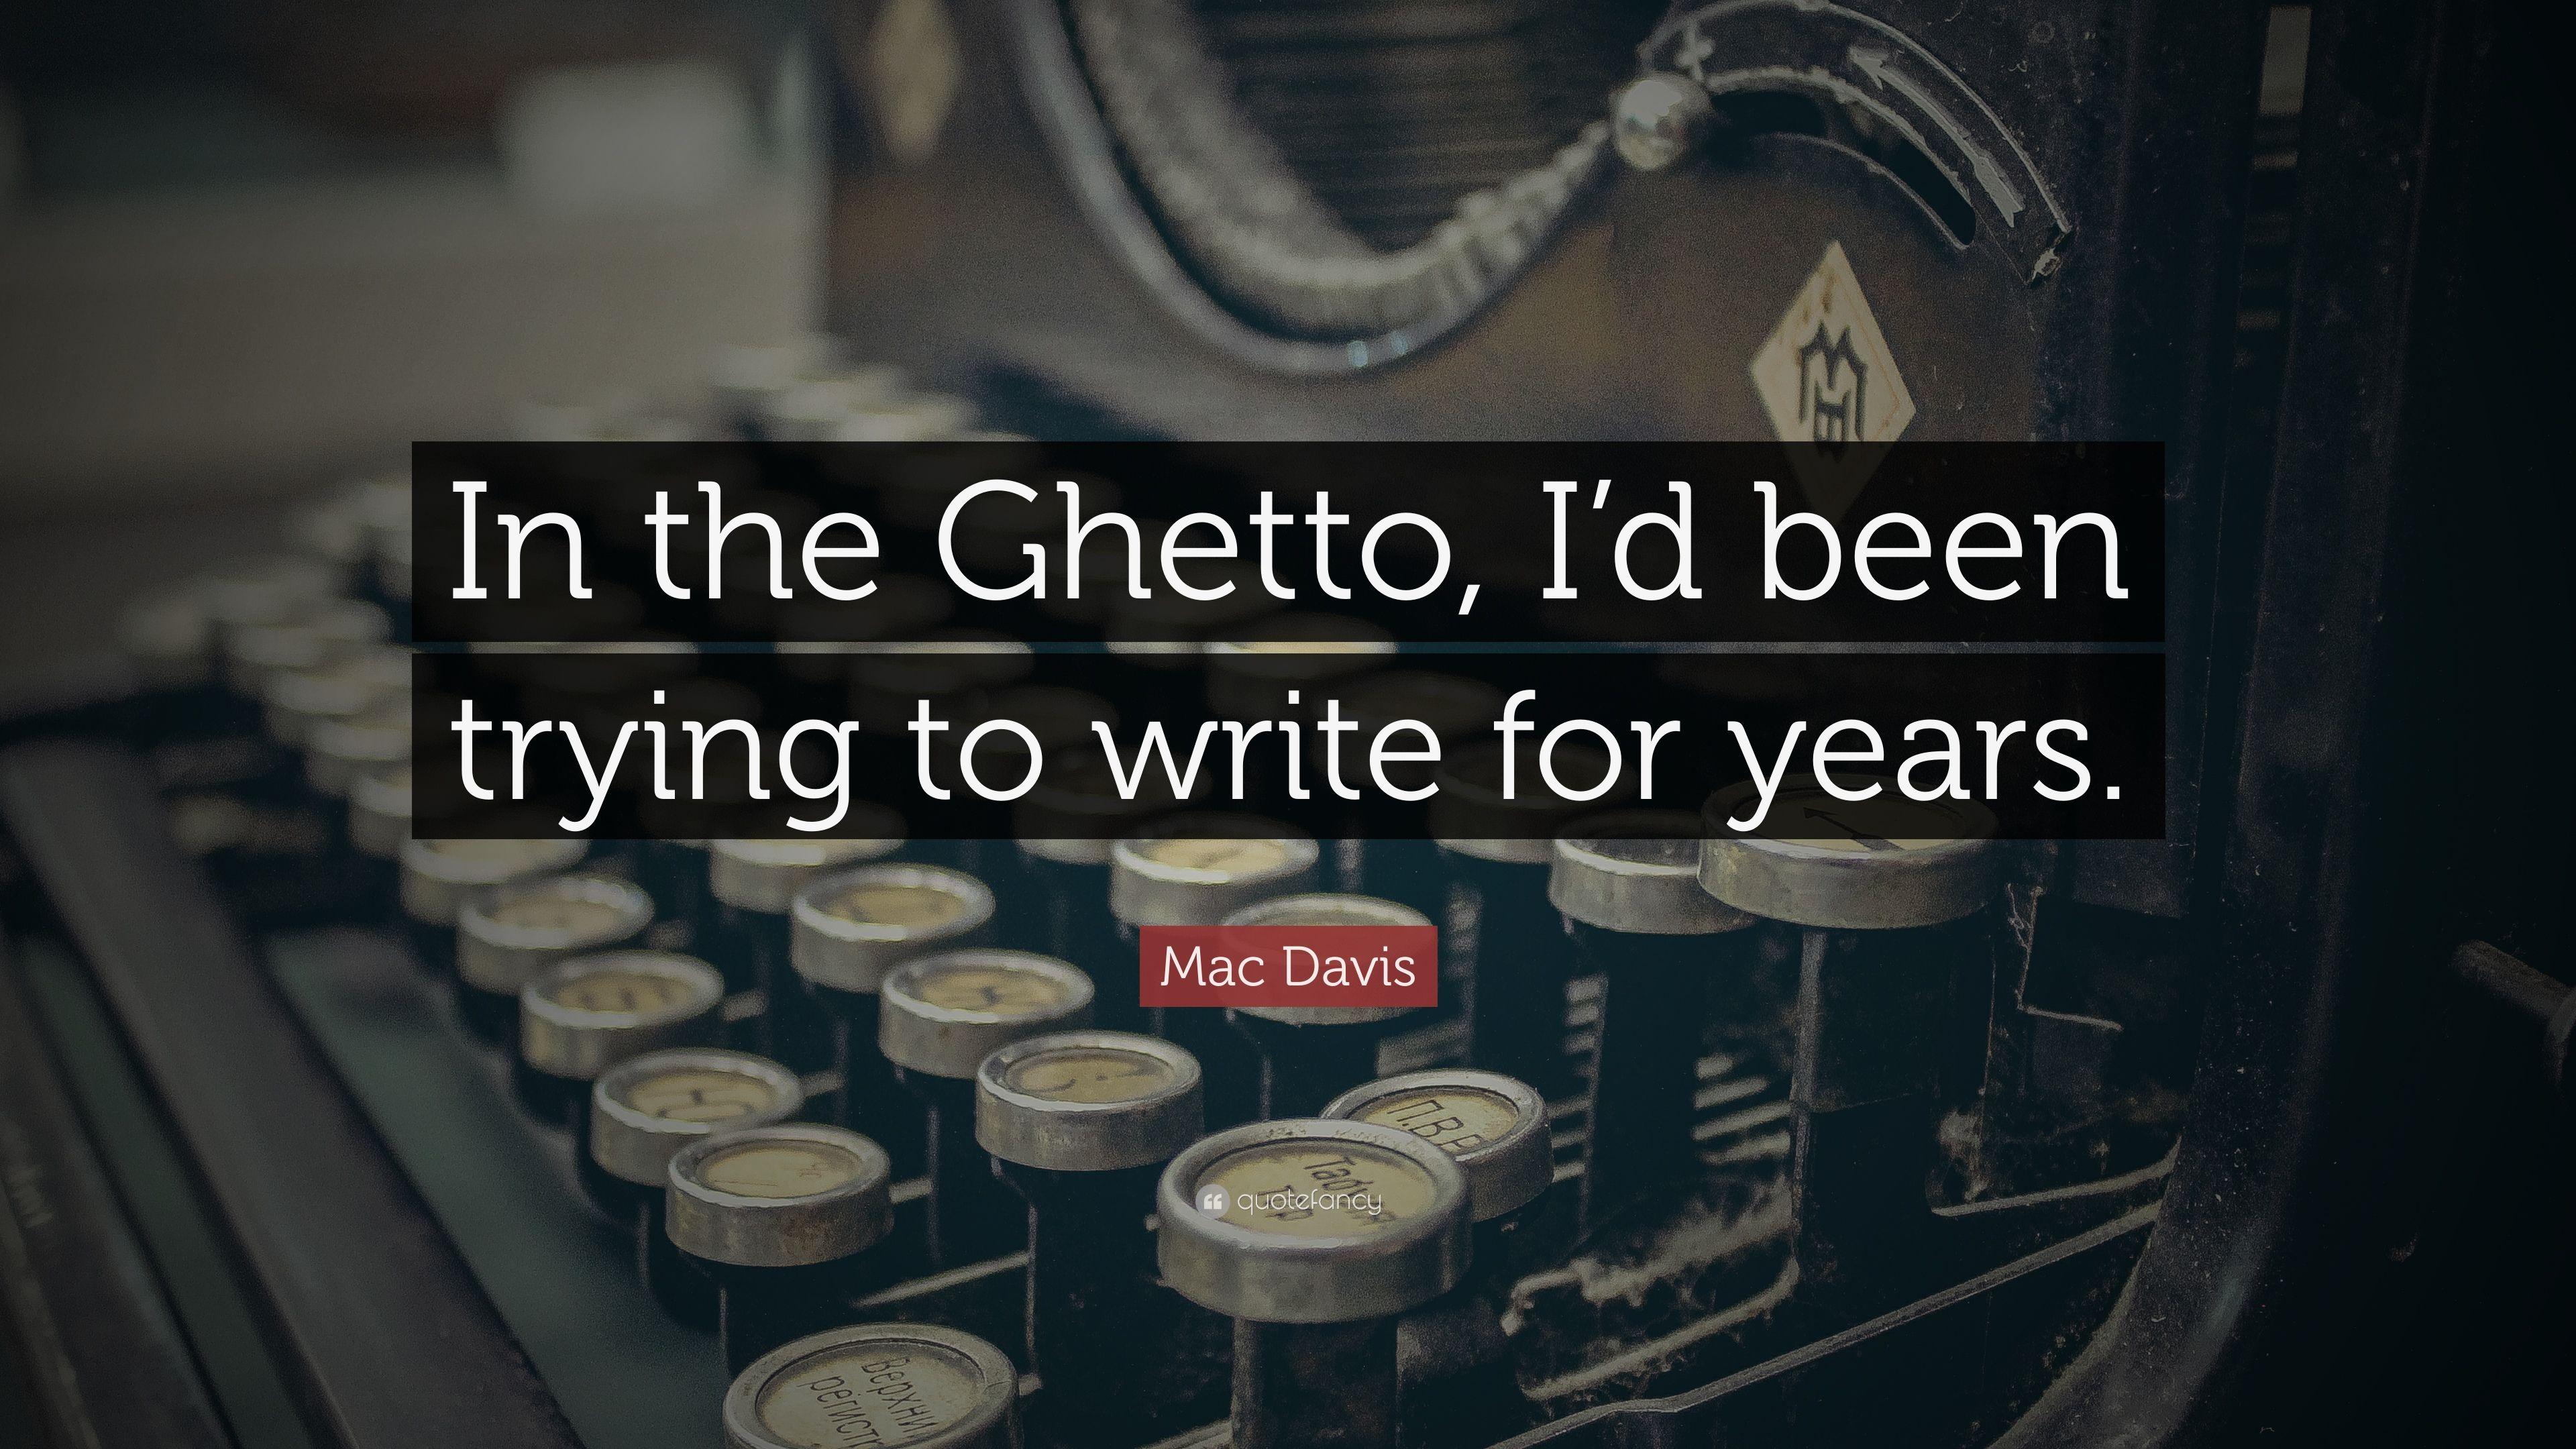 Mac Davis Quote: "In the Ghetto, I'd been trying to write for yea...